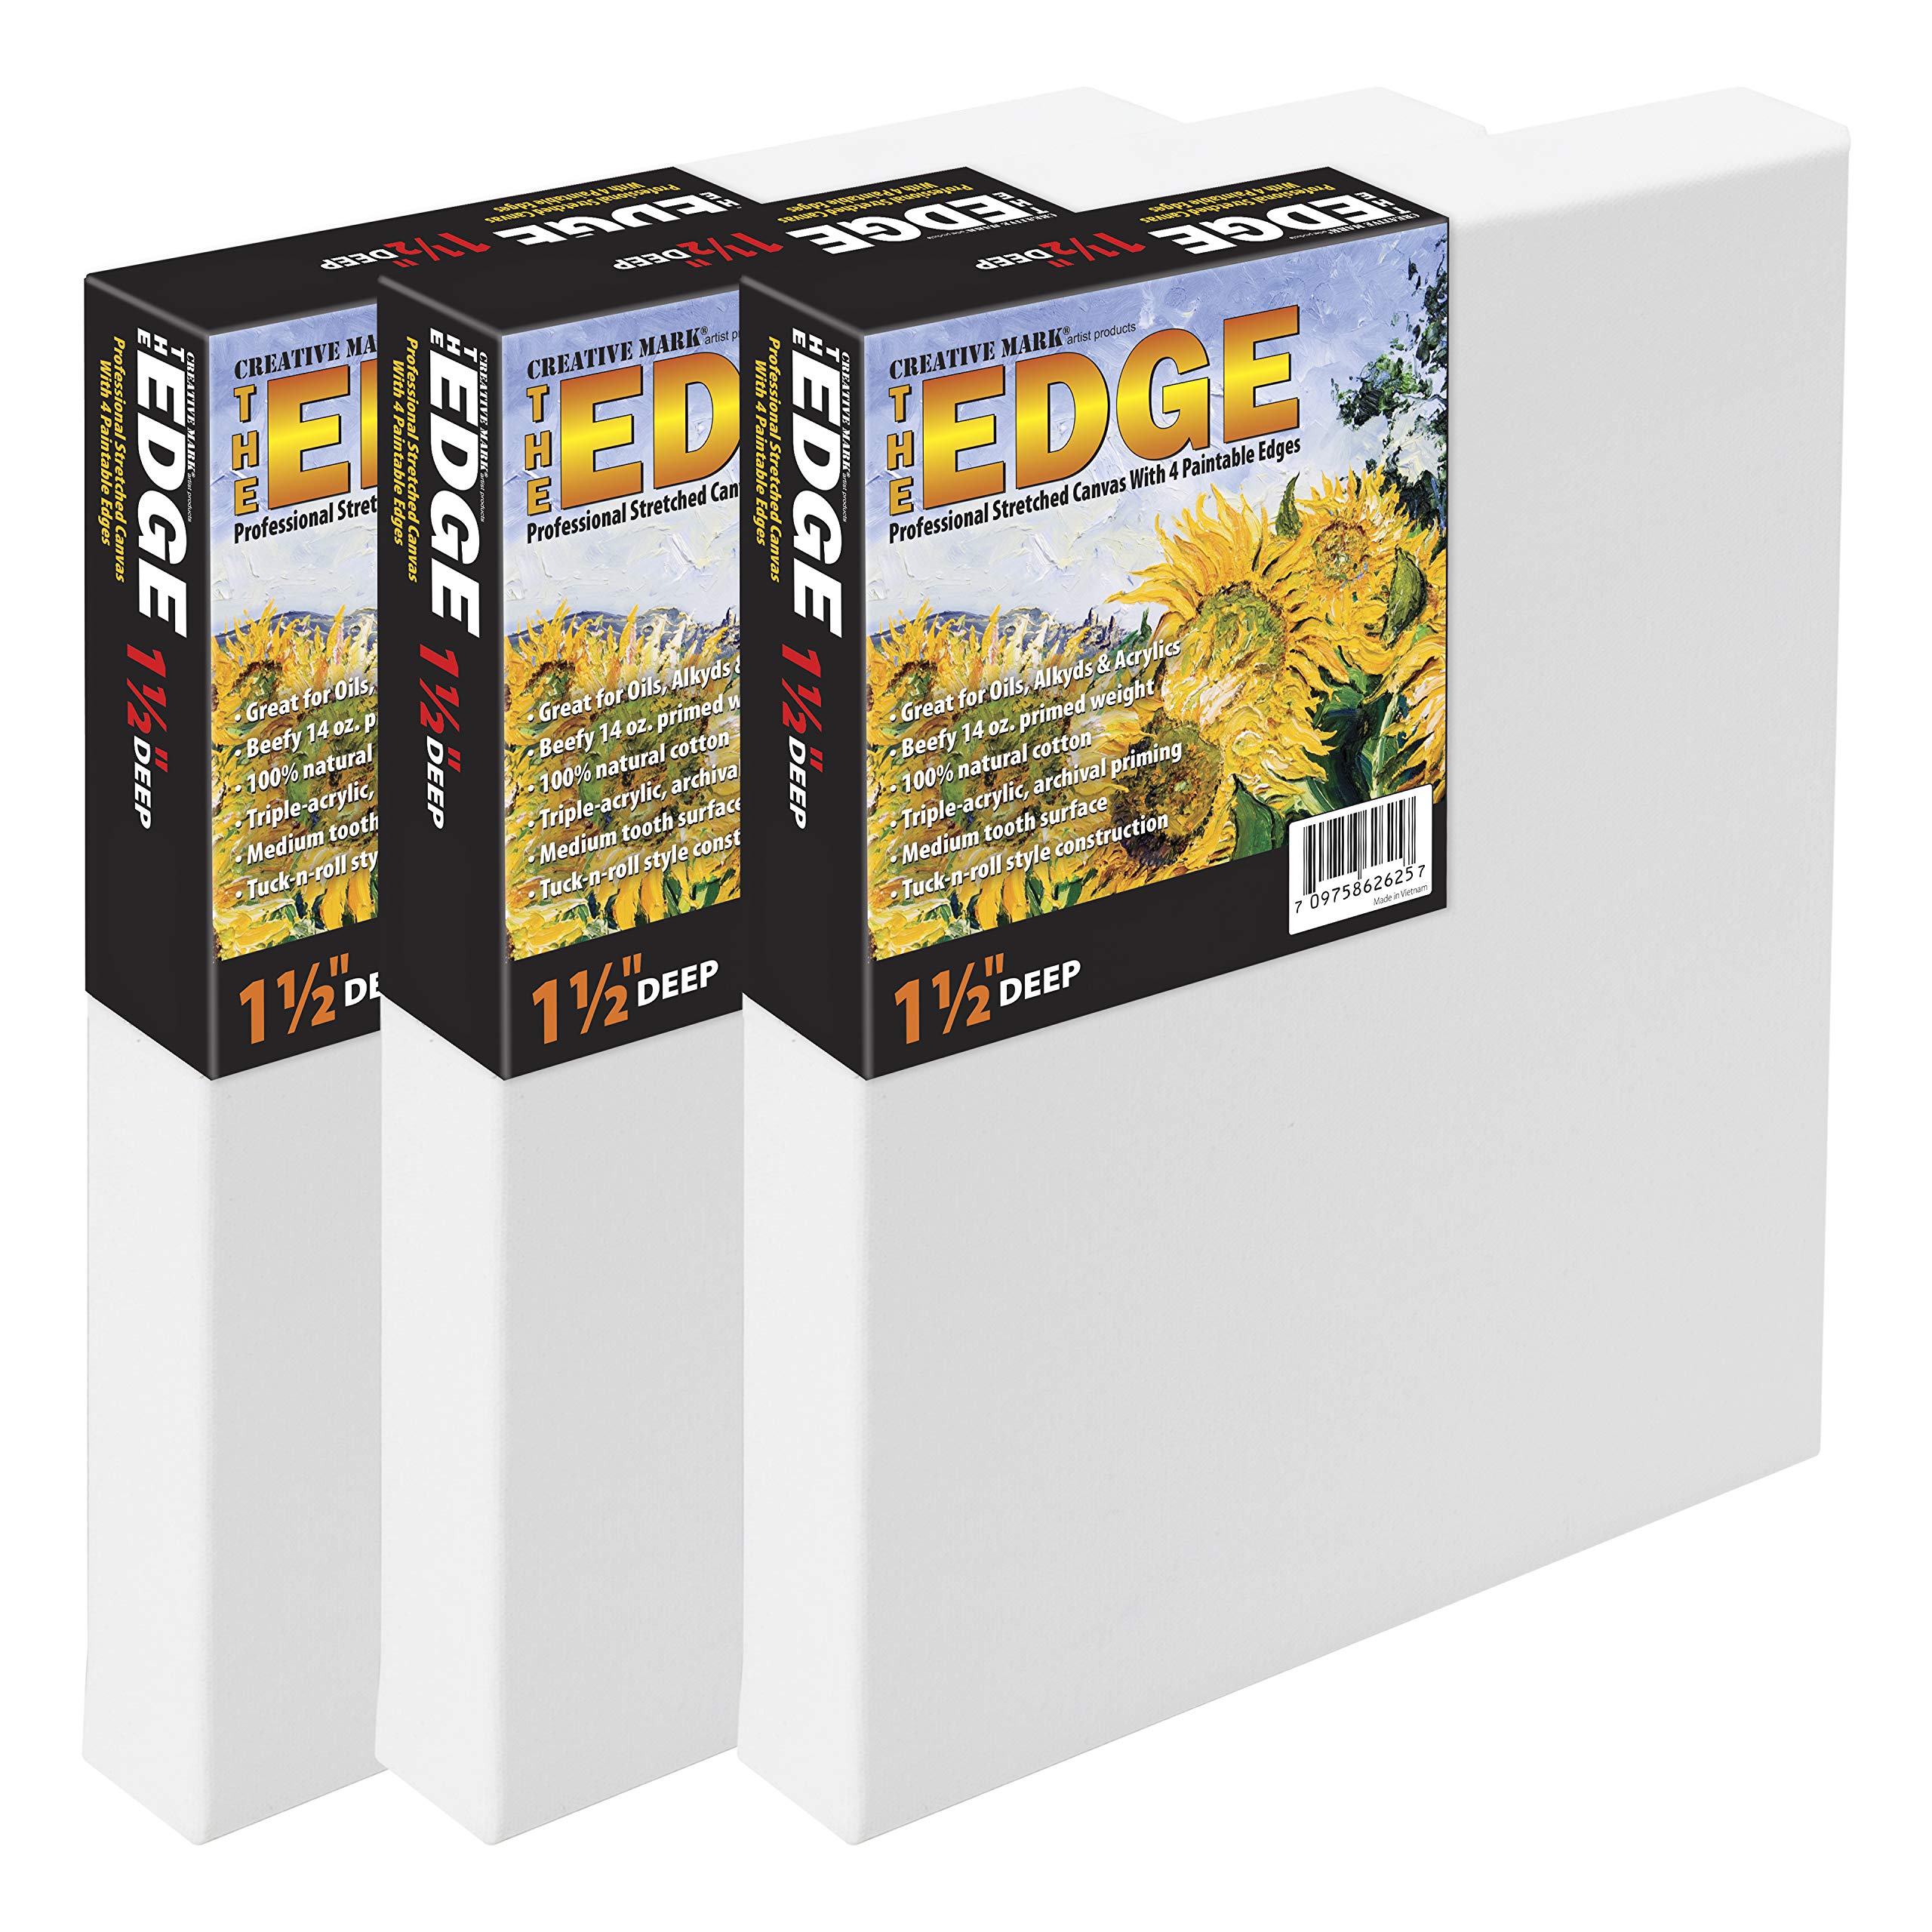 Creative Mark The Edge All Media Cotton Deluxe Stretched Canvas - 18x24" - 3 Pack of 1-1/2'' Deep Triple Acrylic Primed Canvas for Painting